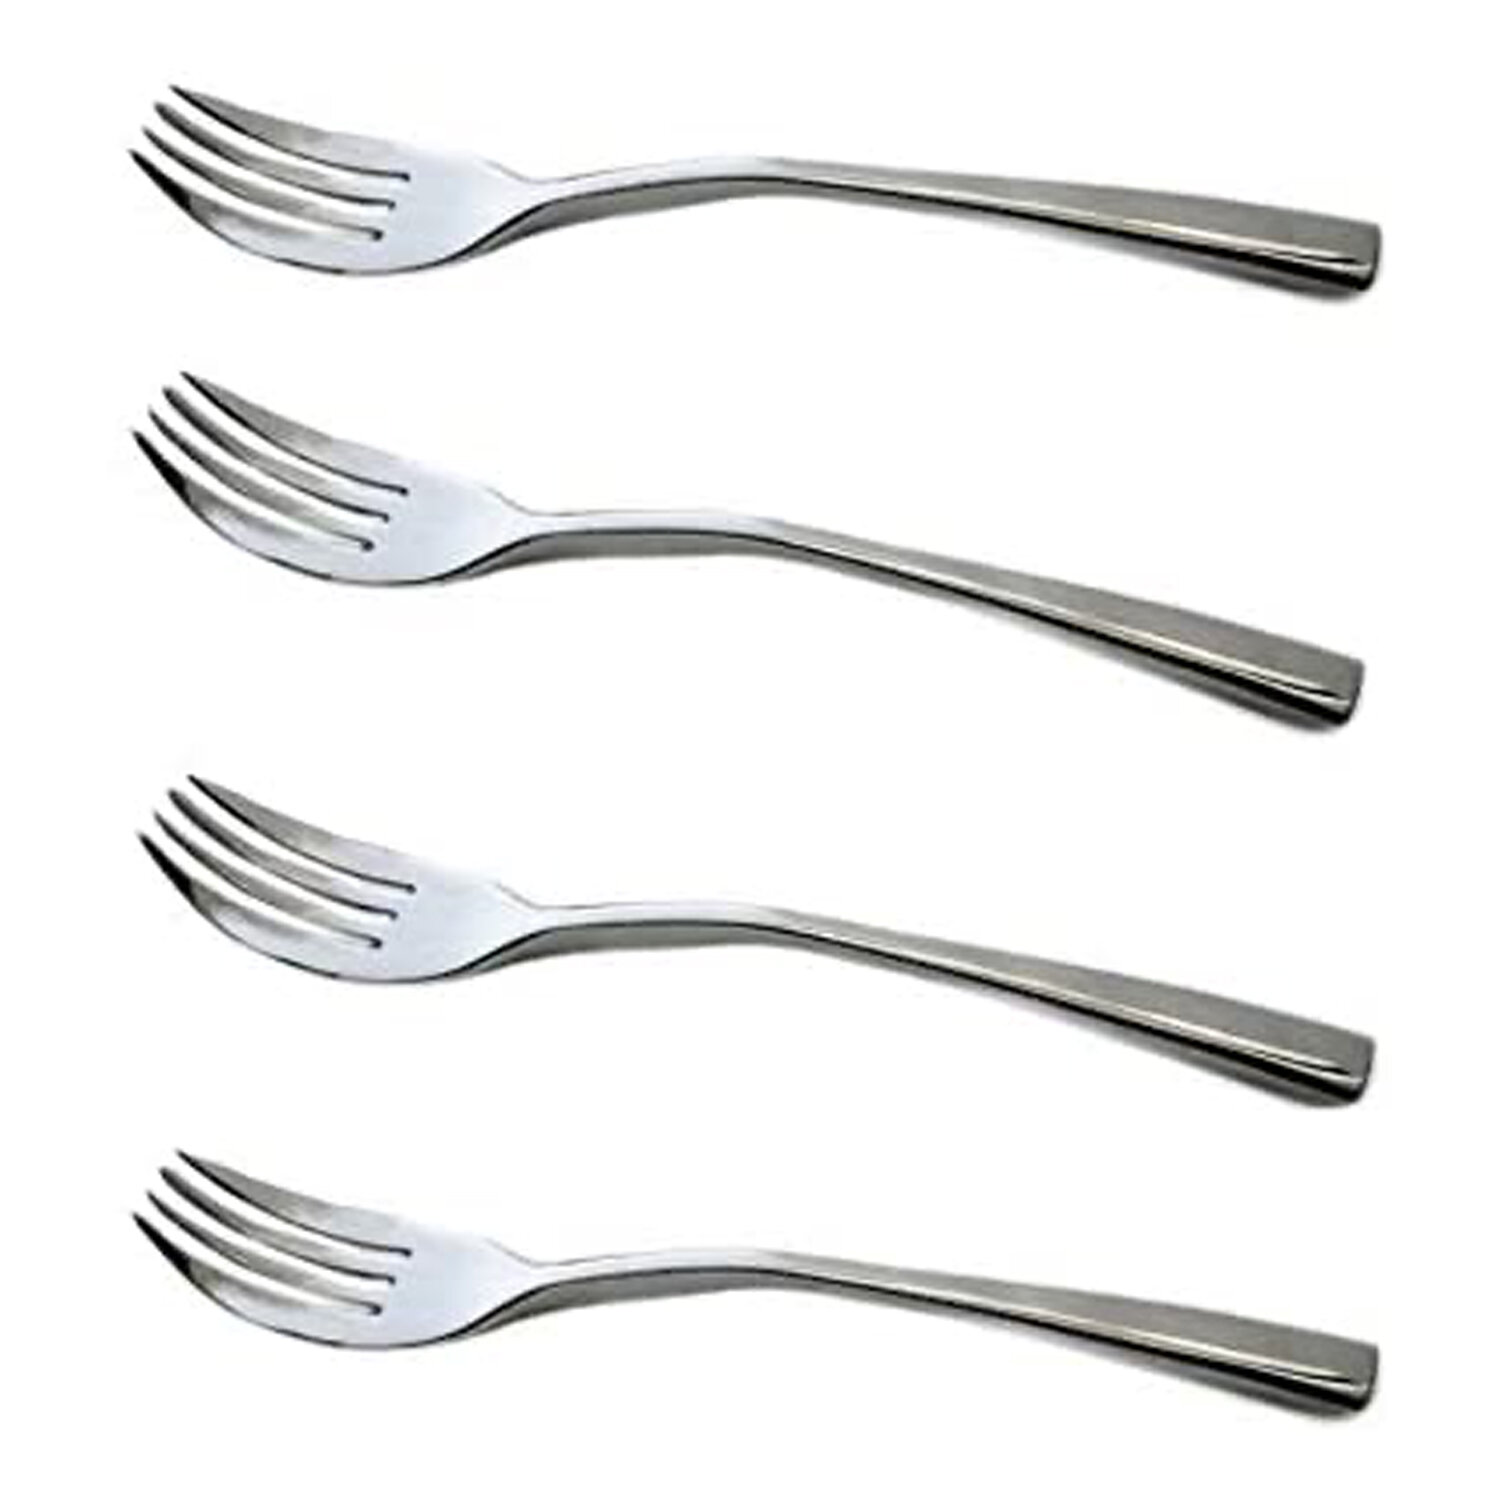 Stainless Steel Long Handle Dinner Forks 4 Tine Cutlery Dining Steak Forks Use